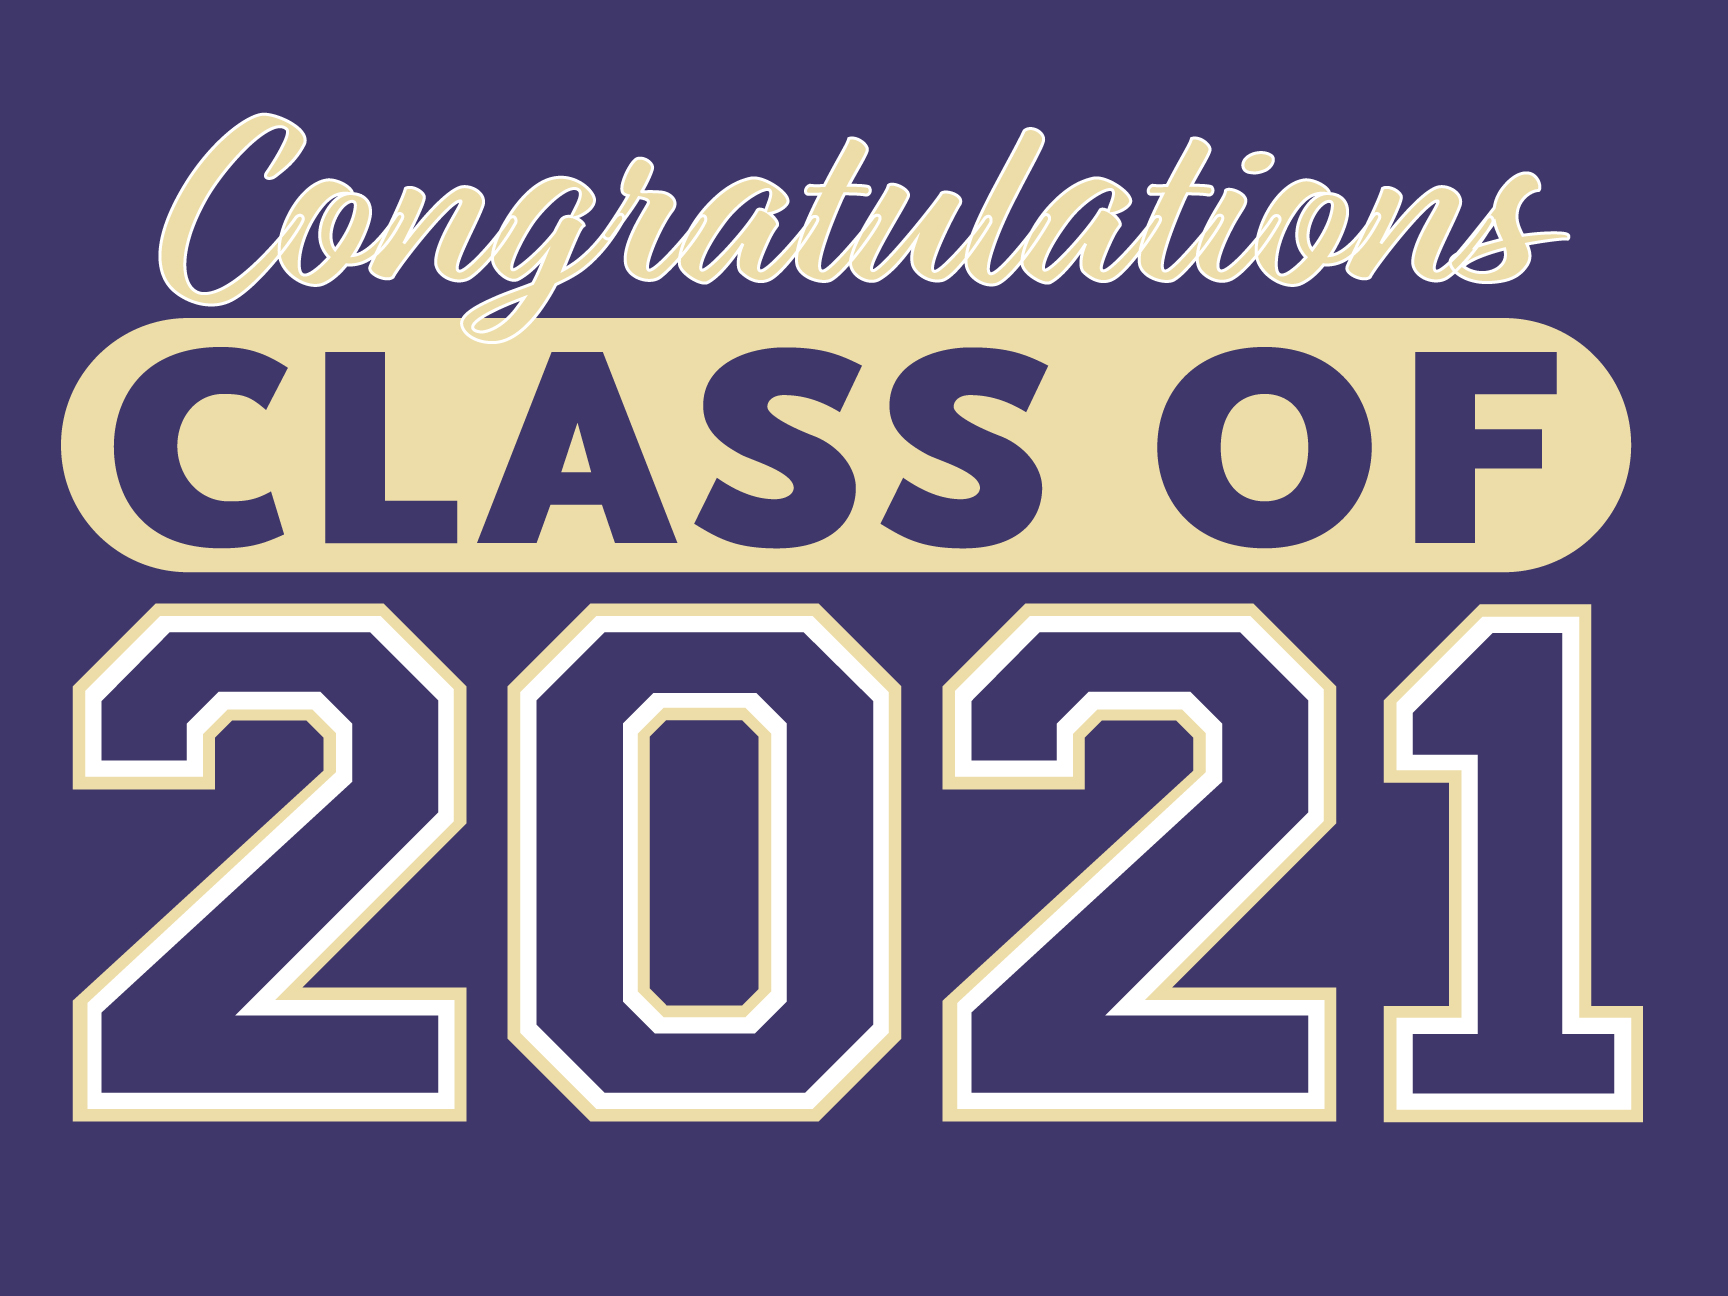 Class of 2021 Yard Sign 18x24" Purple and Gold w/background (Single Sided)